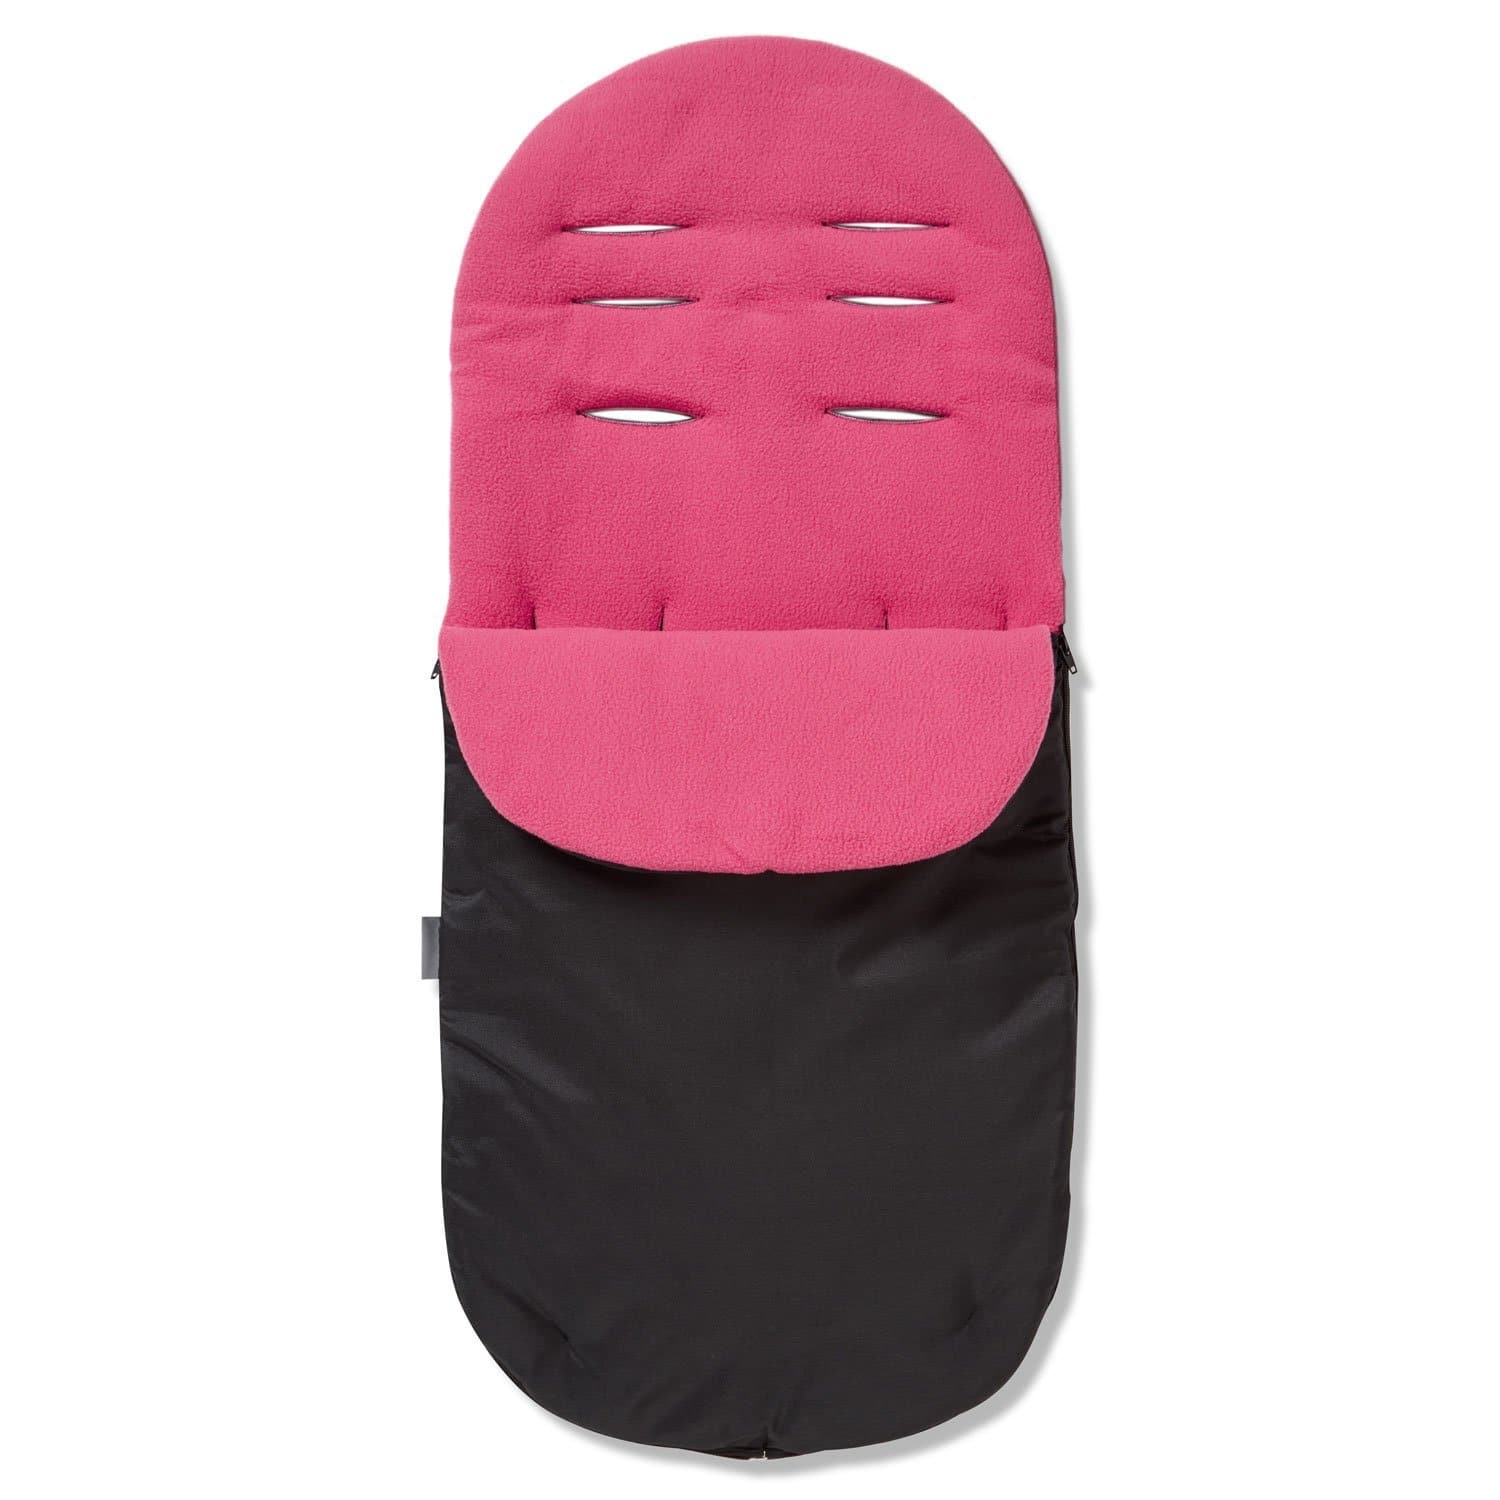 Footmuff / Cosy Toes Compatible with Maxi Cosi - Dark Pink / Fits All Models | For Your Little One